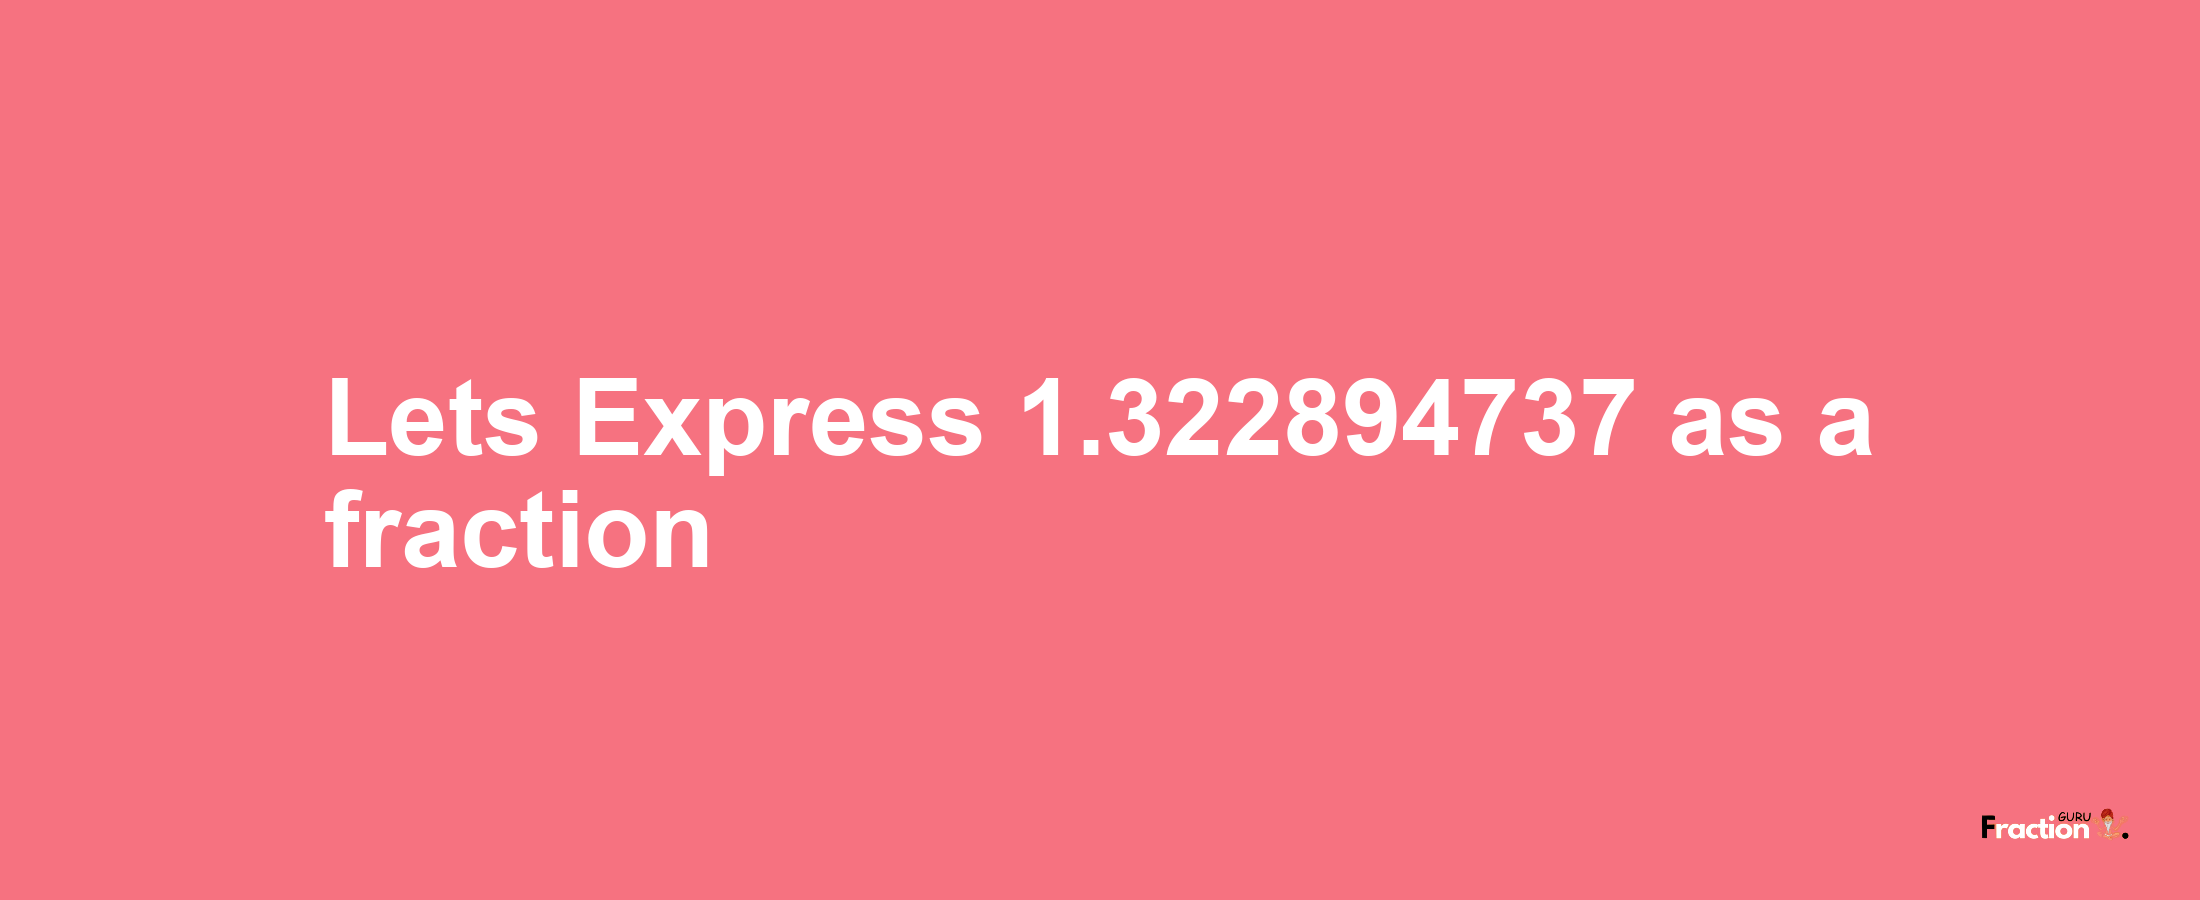 Lets Express 1.322894737 as afraction